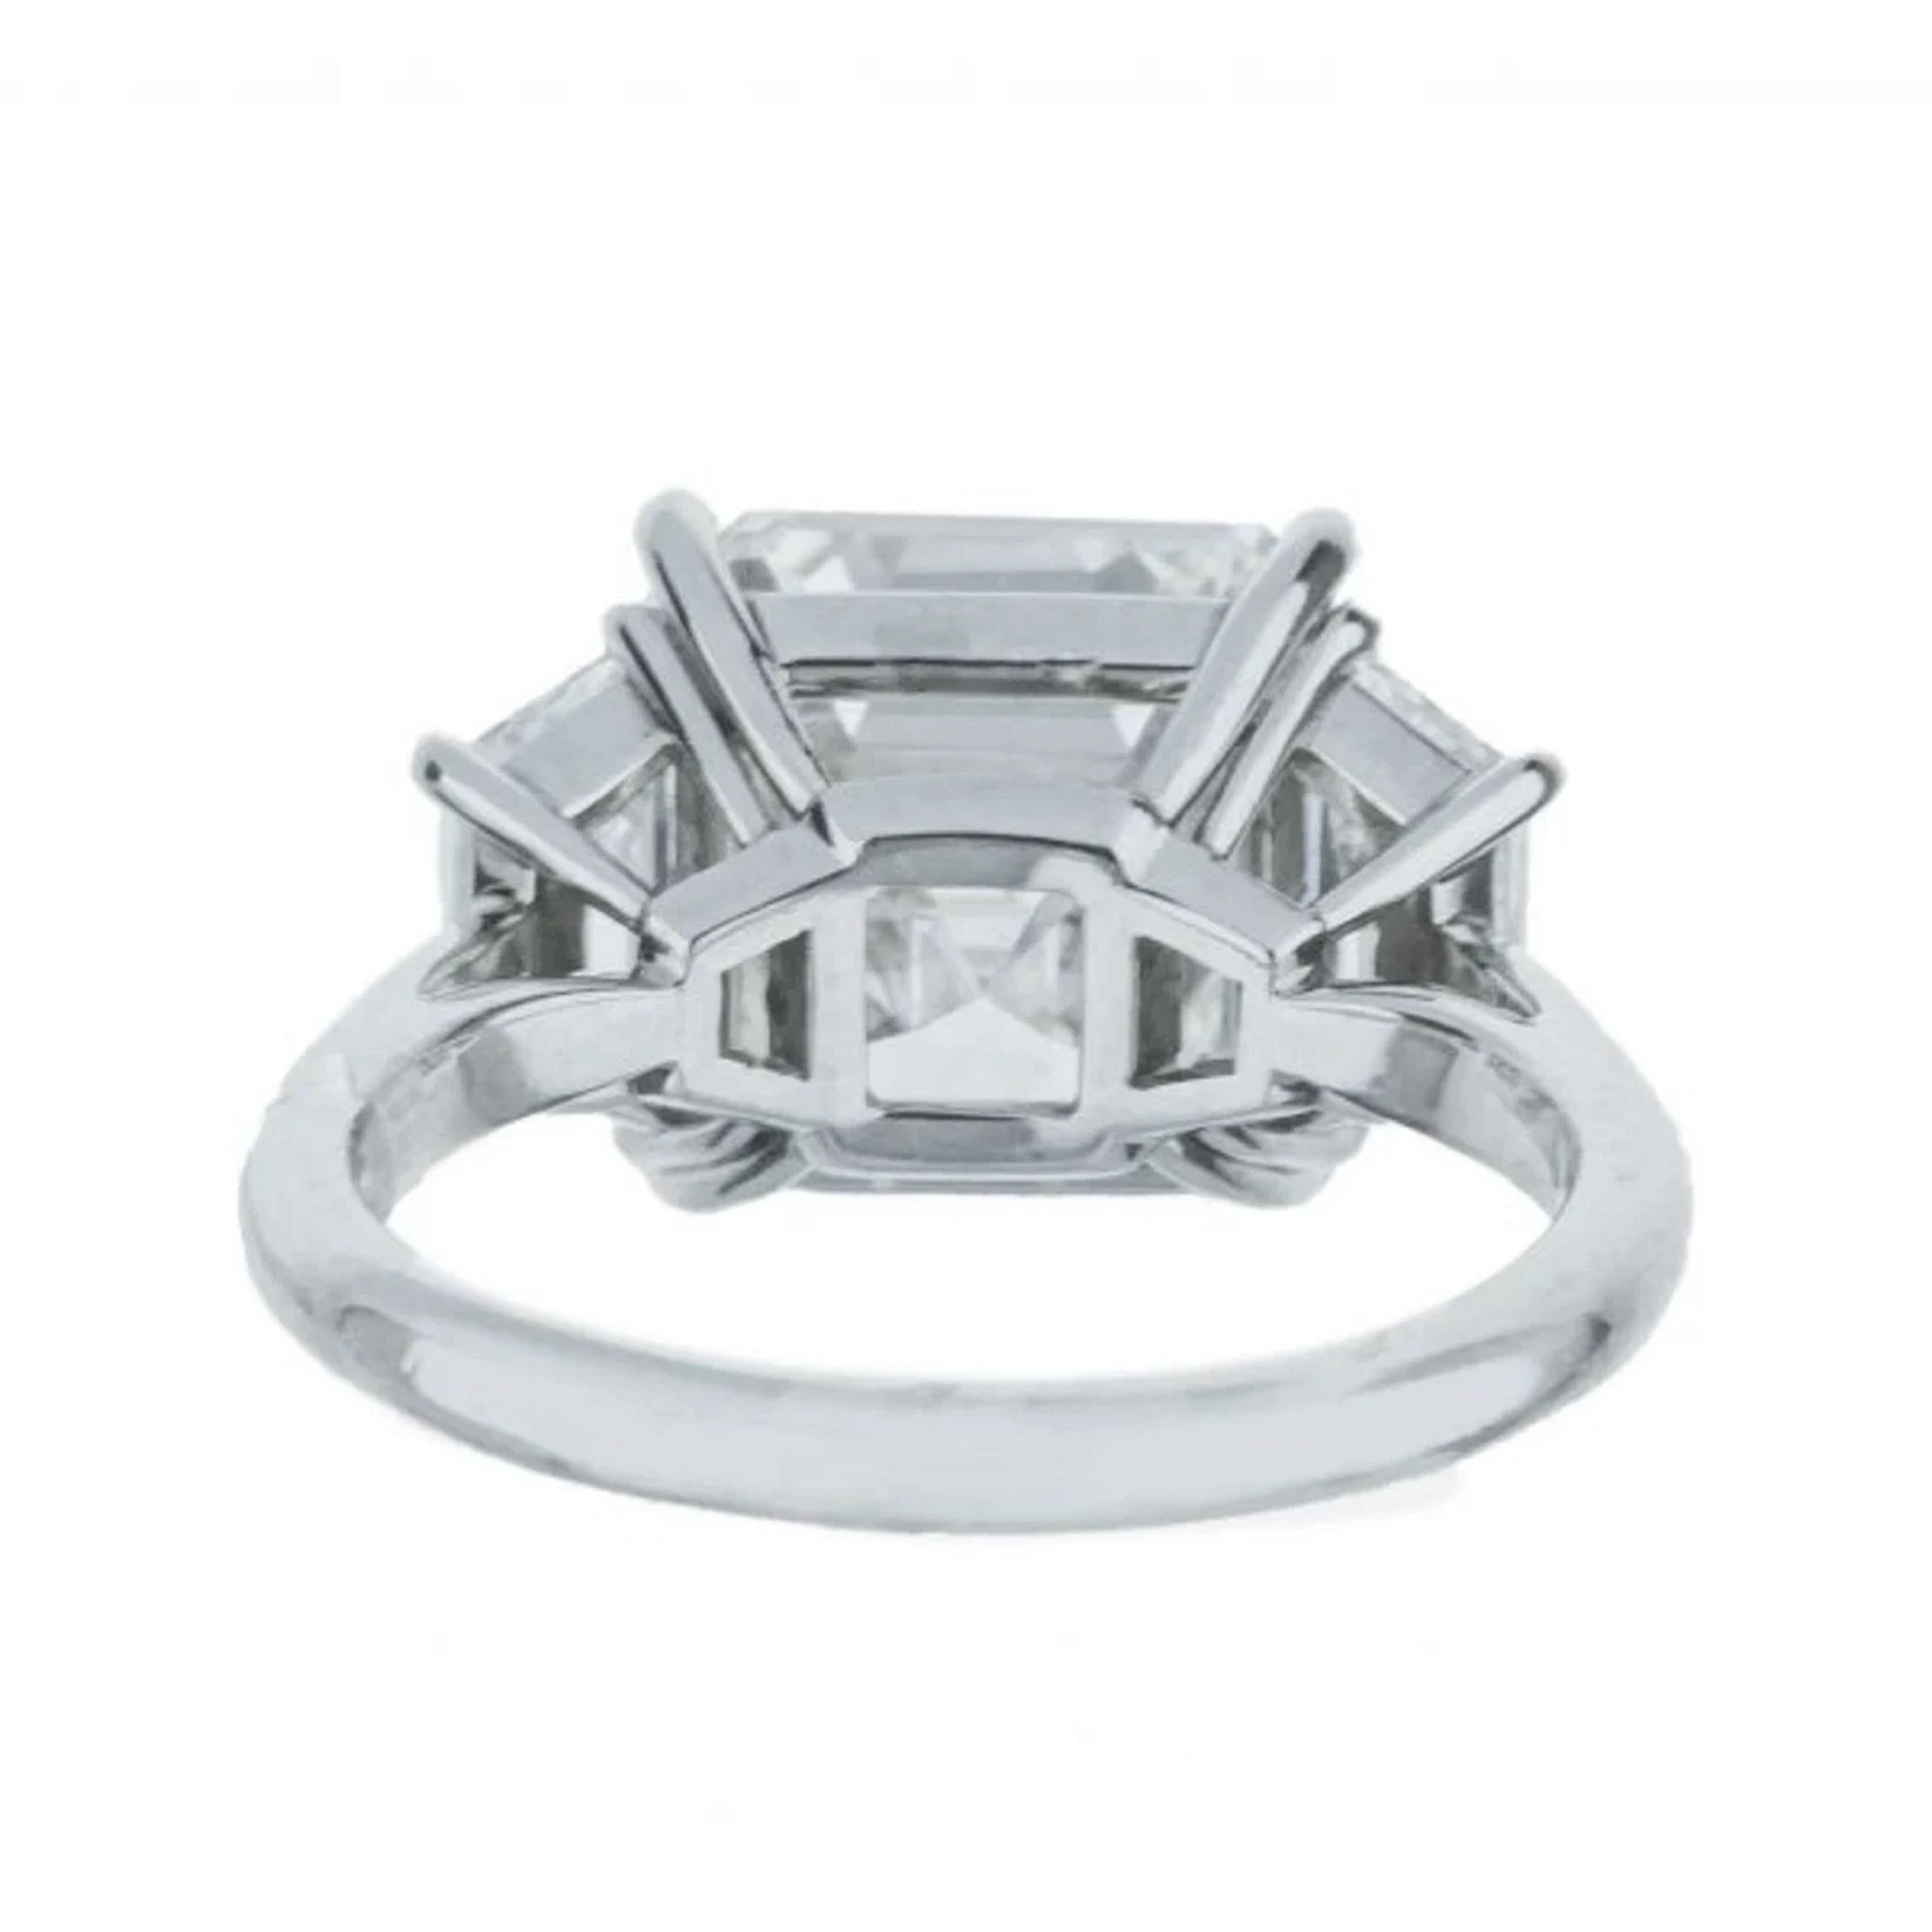 An amazing and clear asscher cut diamond certified by GIA 
4 CARATS
VS1
H COLOR 
EXCELLENT CUT